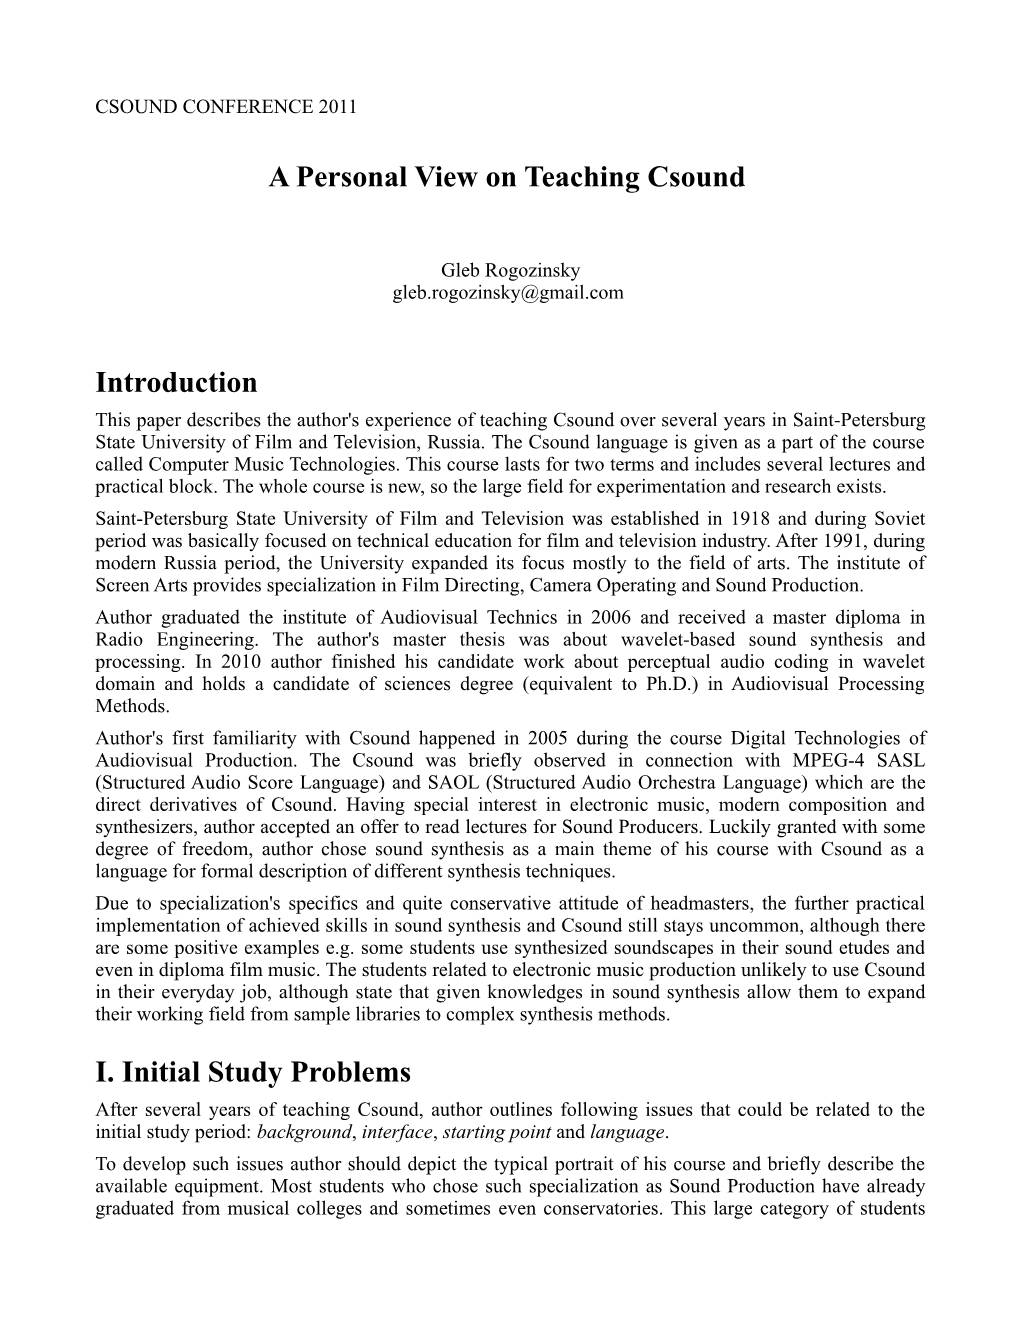 A Personal View on Teaching Csound Introduction I. Initial Study Problems